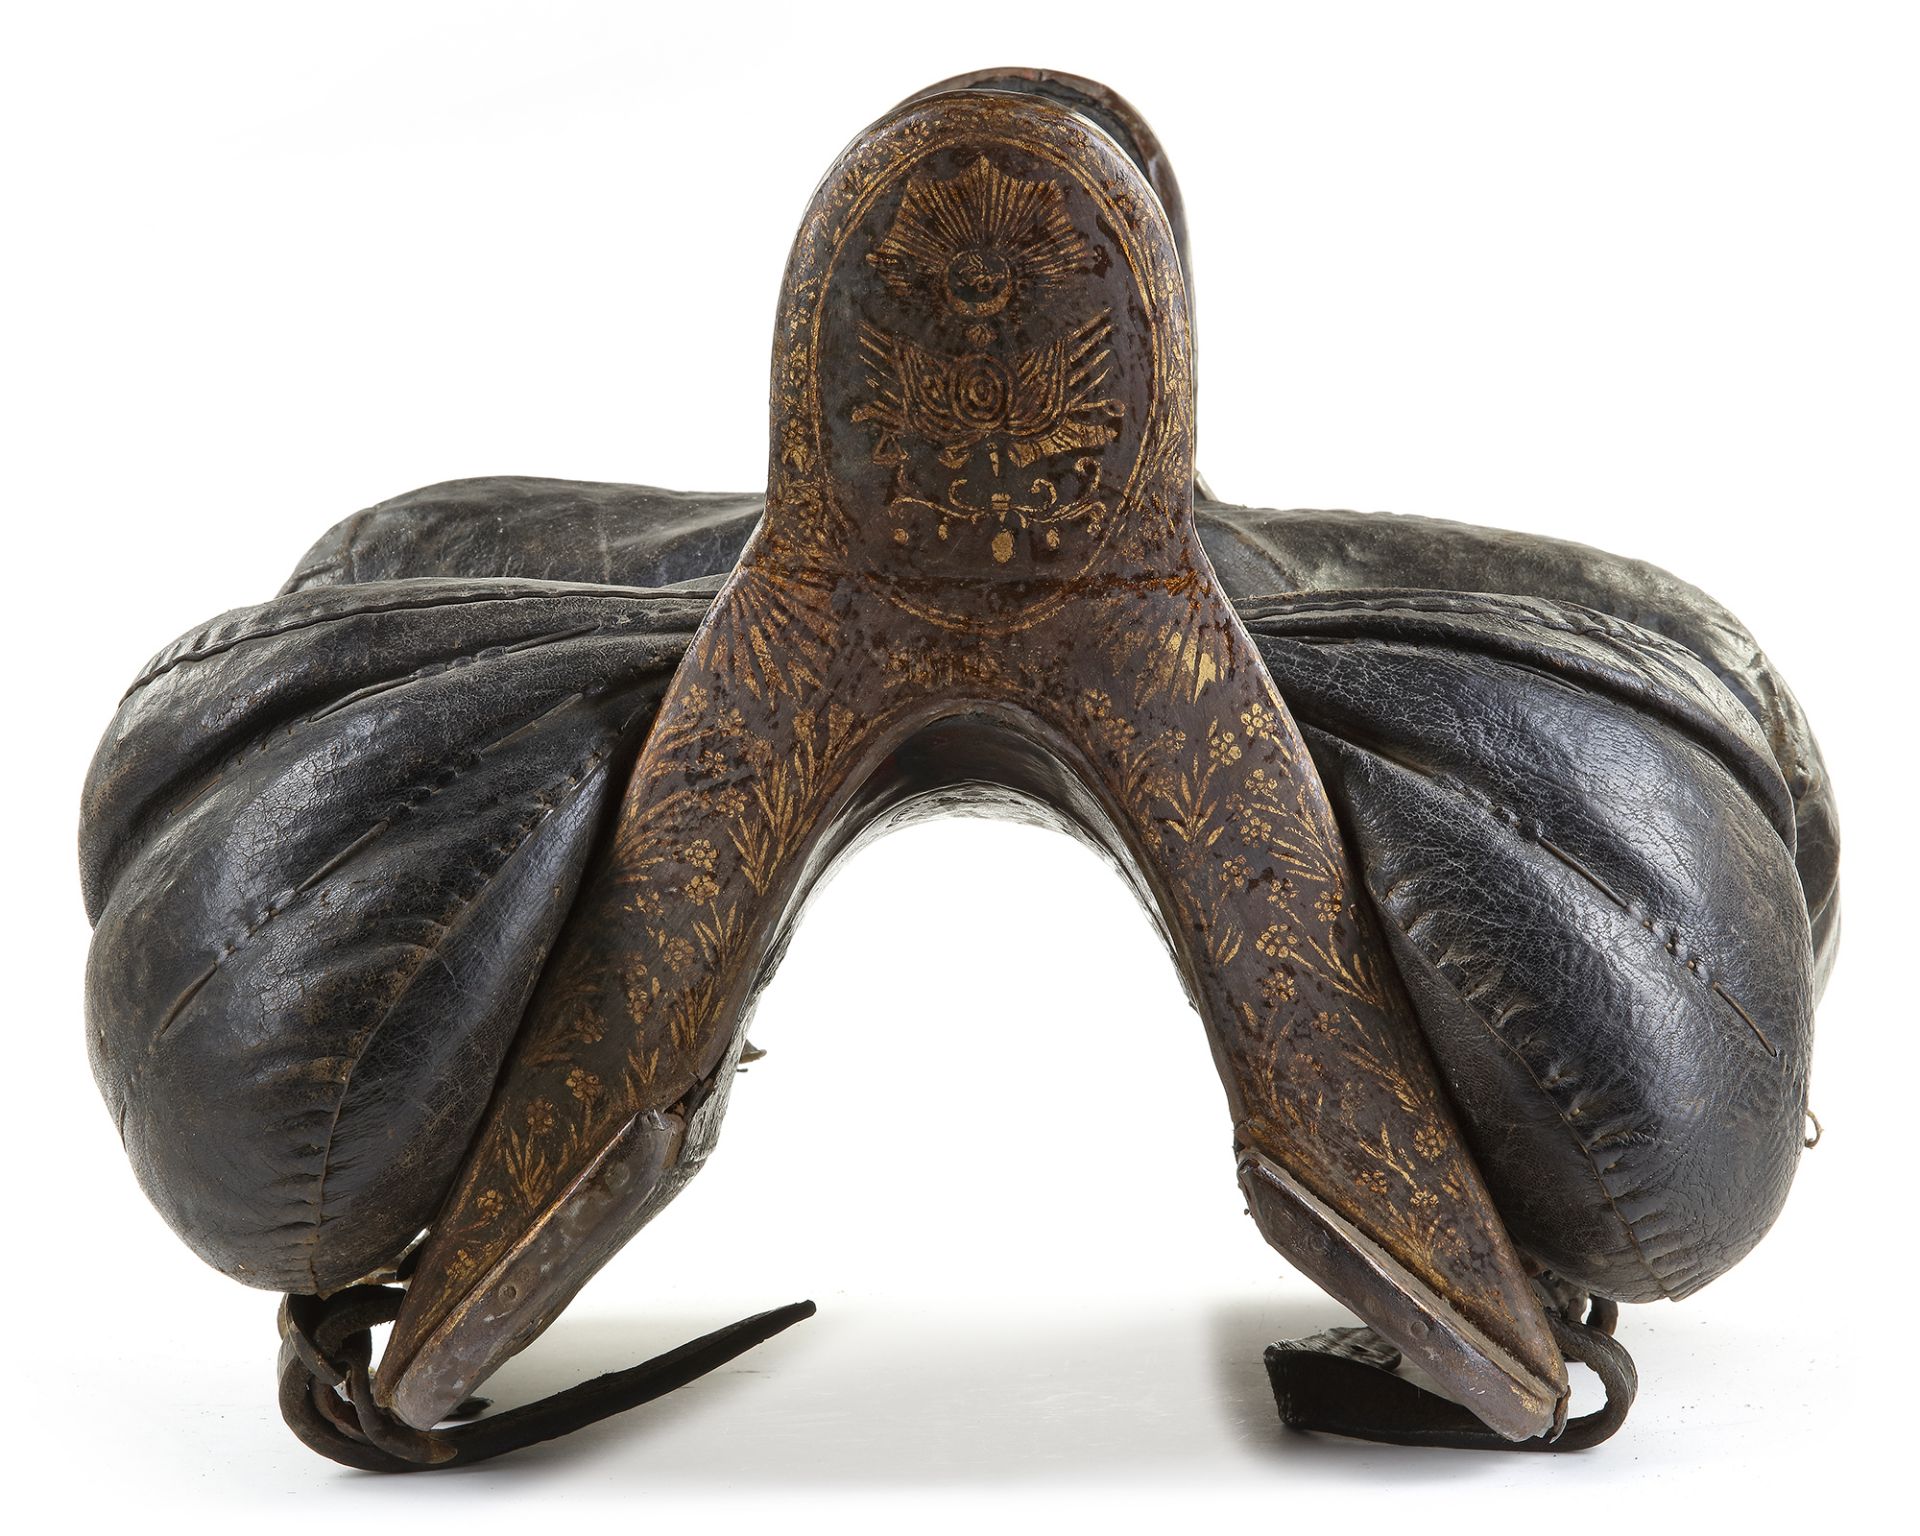 AN OTTOMAN LACQUER WOODEN SADDLE AND LEATHER COVER, EARLY 19TH CENTURY - Image 2 of 4